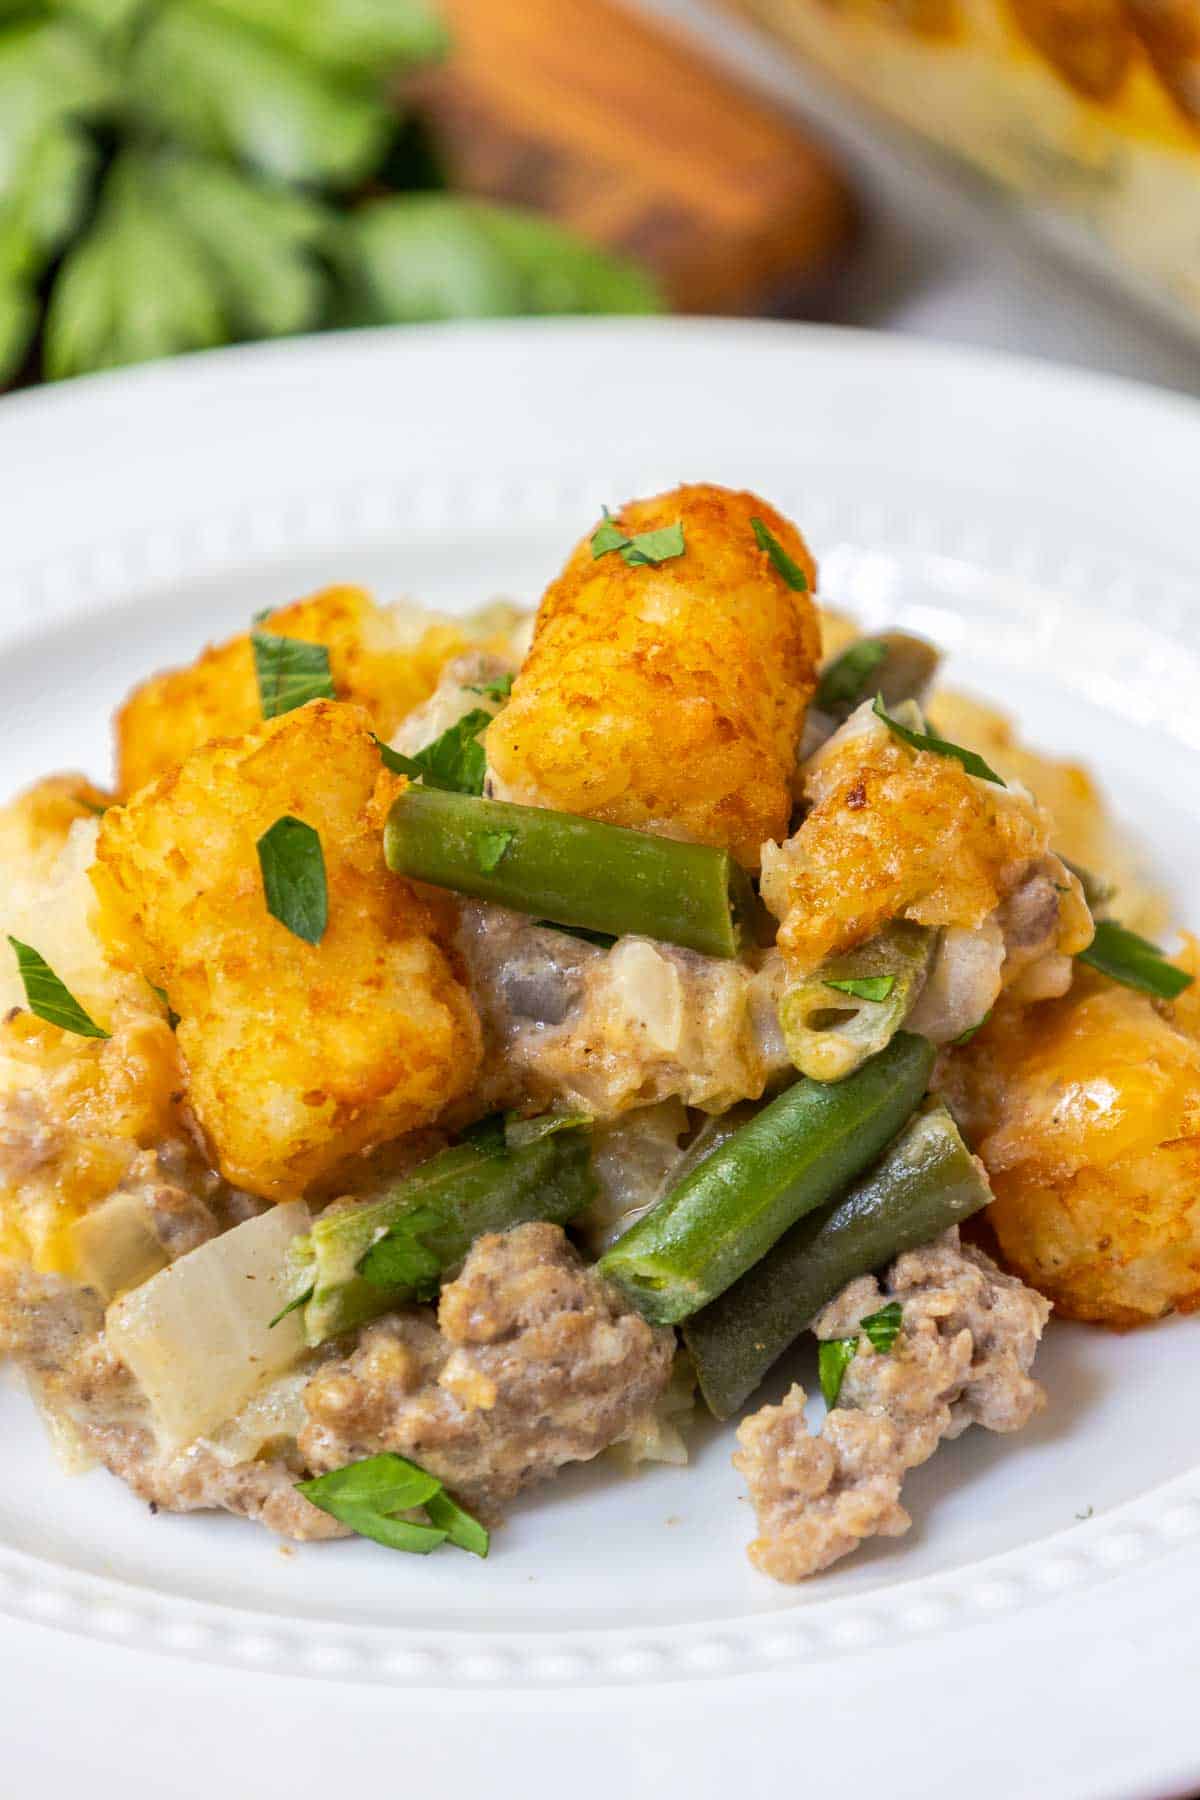 Green bean tater tot casserole wit cheese and ground beef